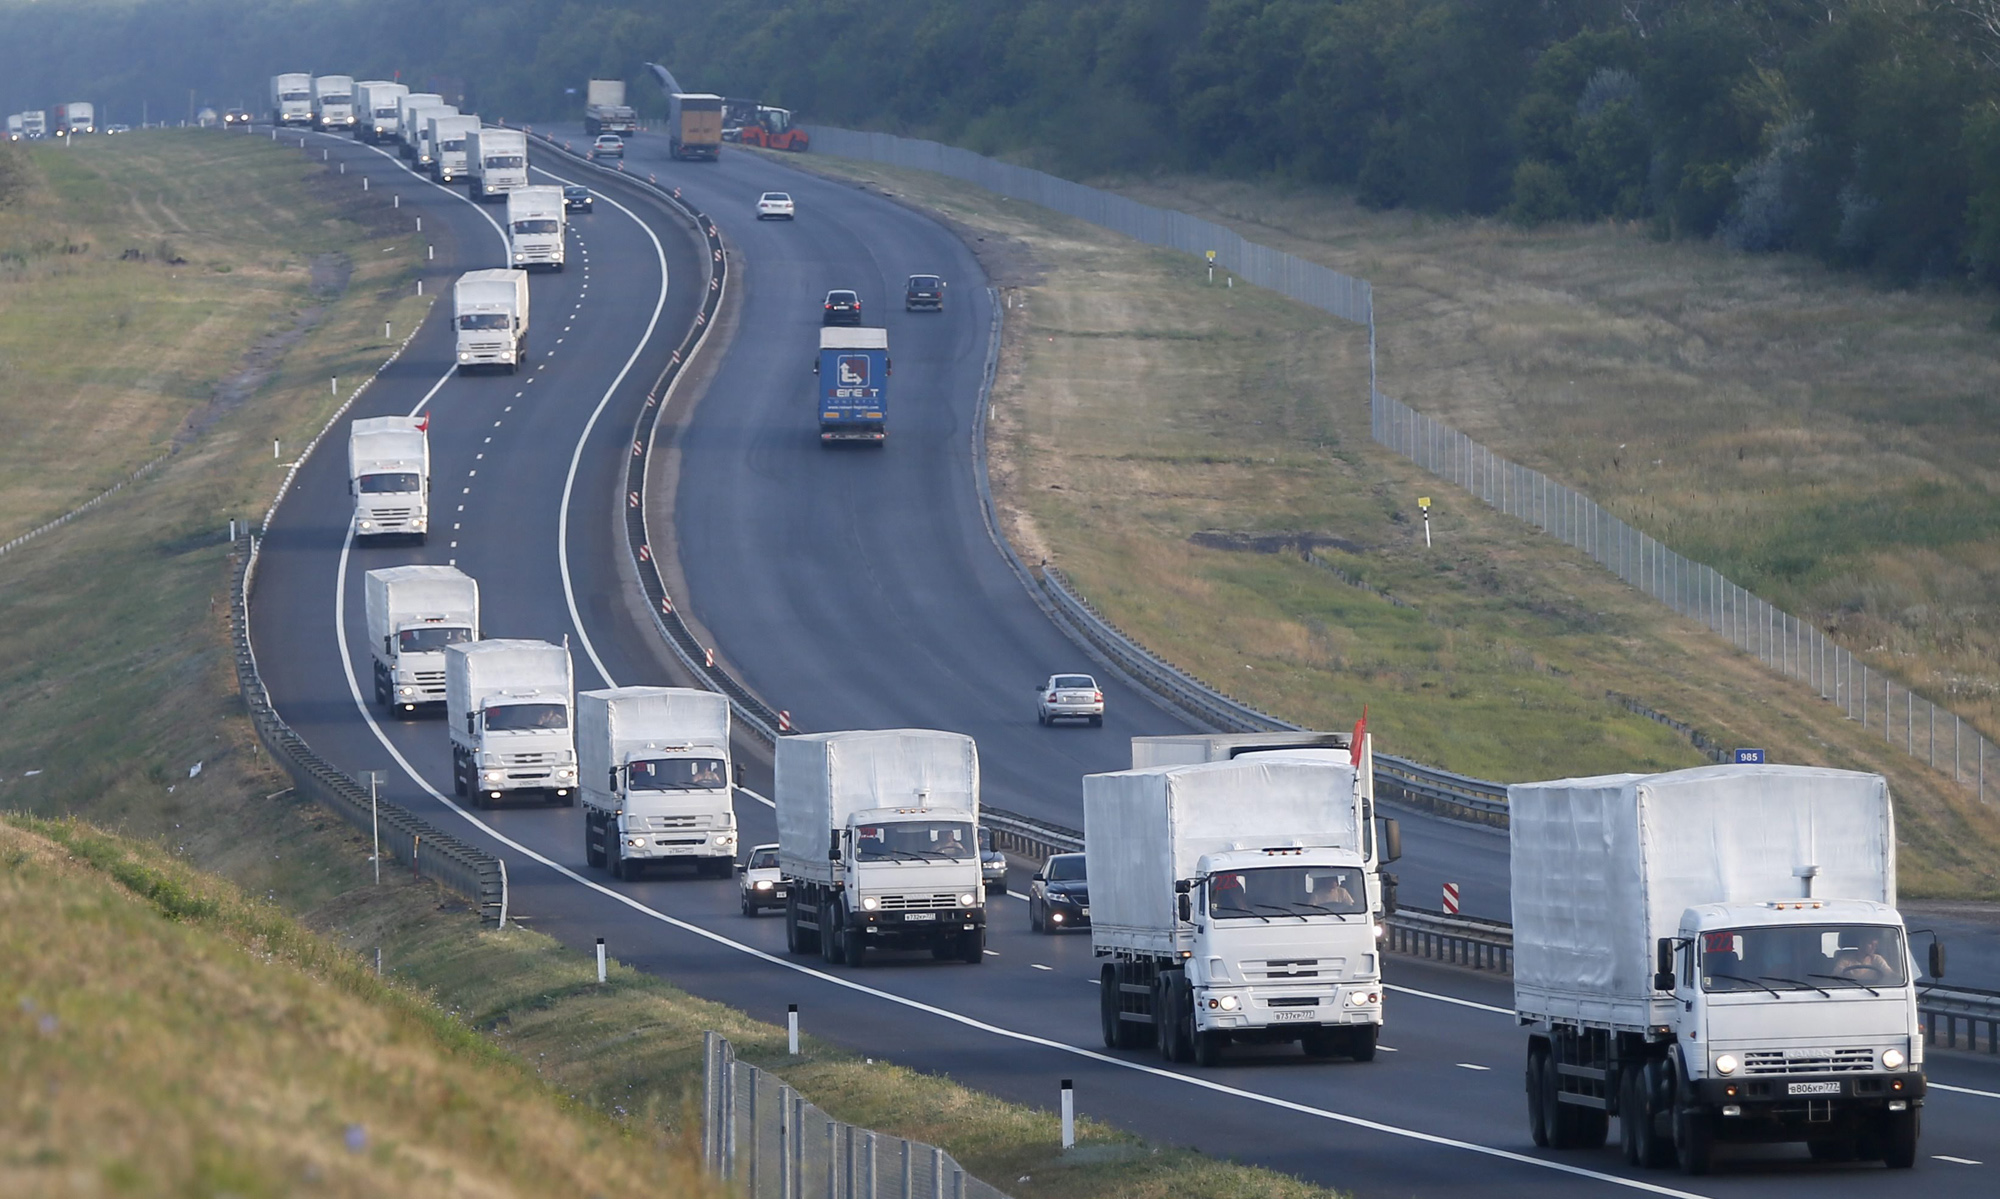 A Russian convoy carrying humanitarian aid for residents in rebel eastern Ukrainian regions moves along a road about 30 miles from Voronezh, Russia, Aug. 14, 2014. (Yuri Kochetko—EPA)